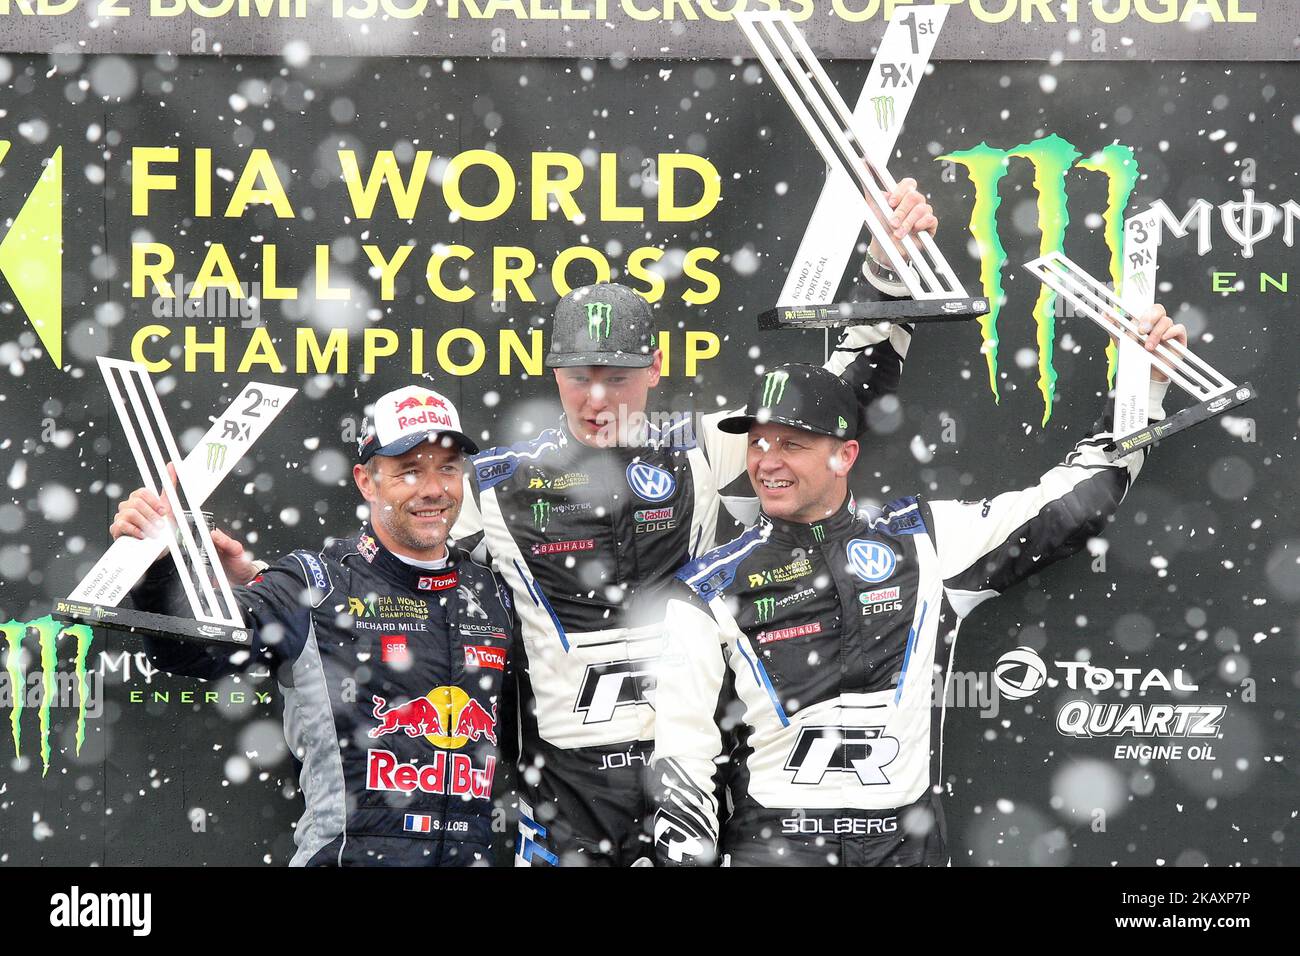 Johan KRISTOFFERSSON winner of race (C), Sebastien LOEB (L) and Petter SOLBERG (R) in Podium Ceremony during the World RX of Portugal 2018, at Montalegre International Circuit, on April 29, 2018 in Montalegre, Portugal. (Photo by Paulo Oliveira / DPI / NurPhoto) Stock Photo